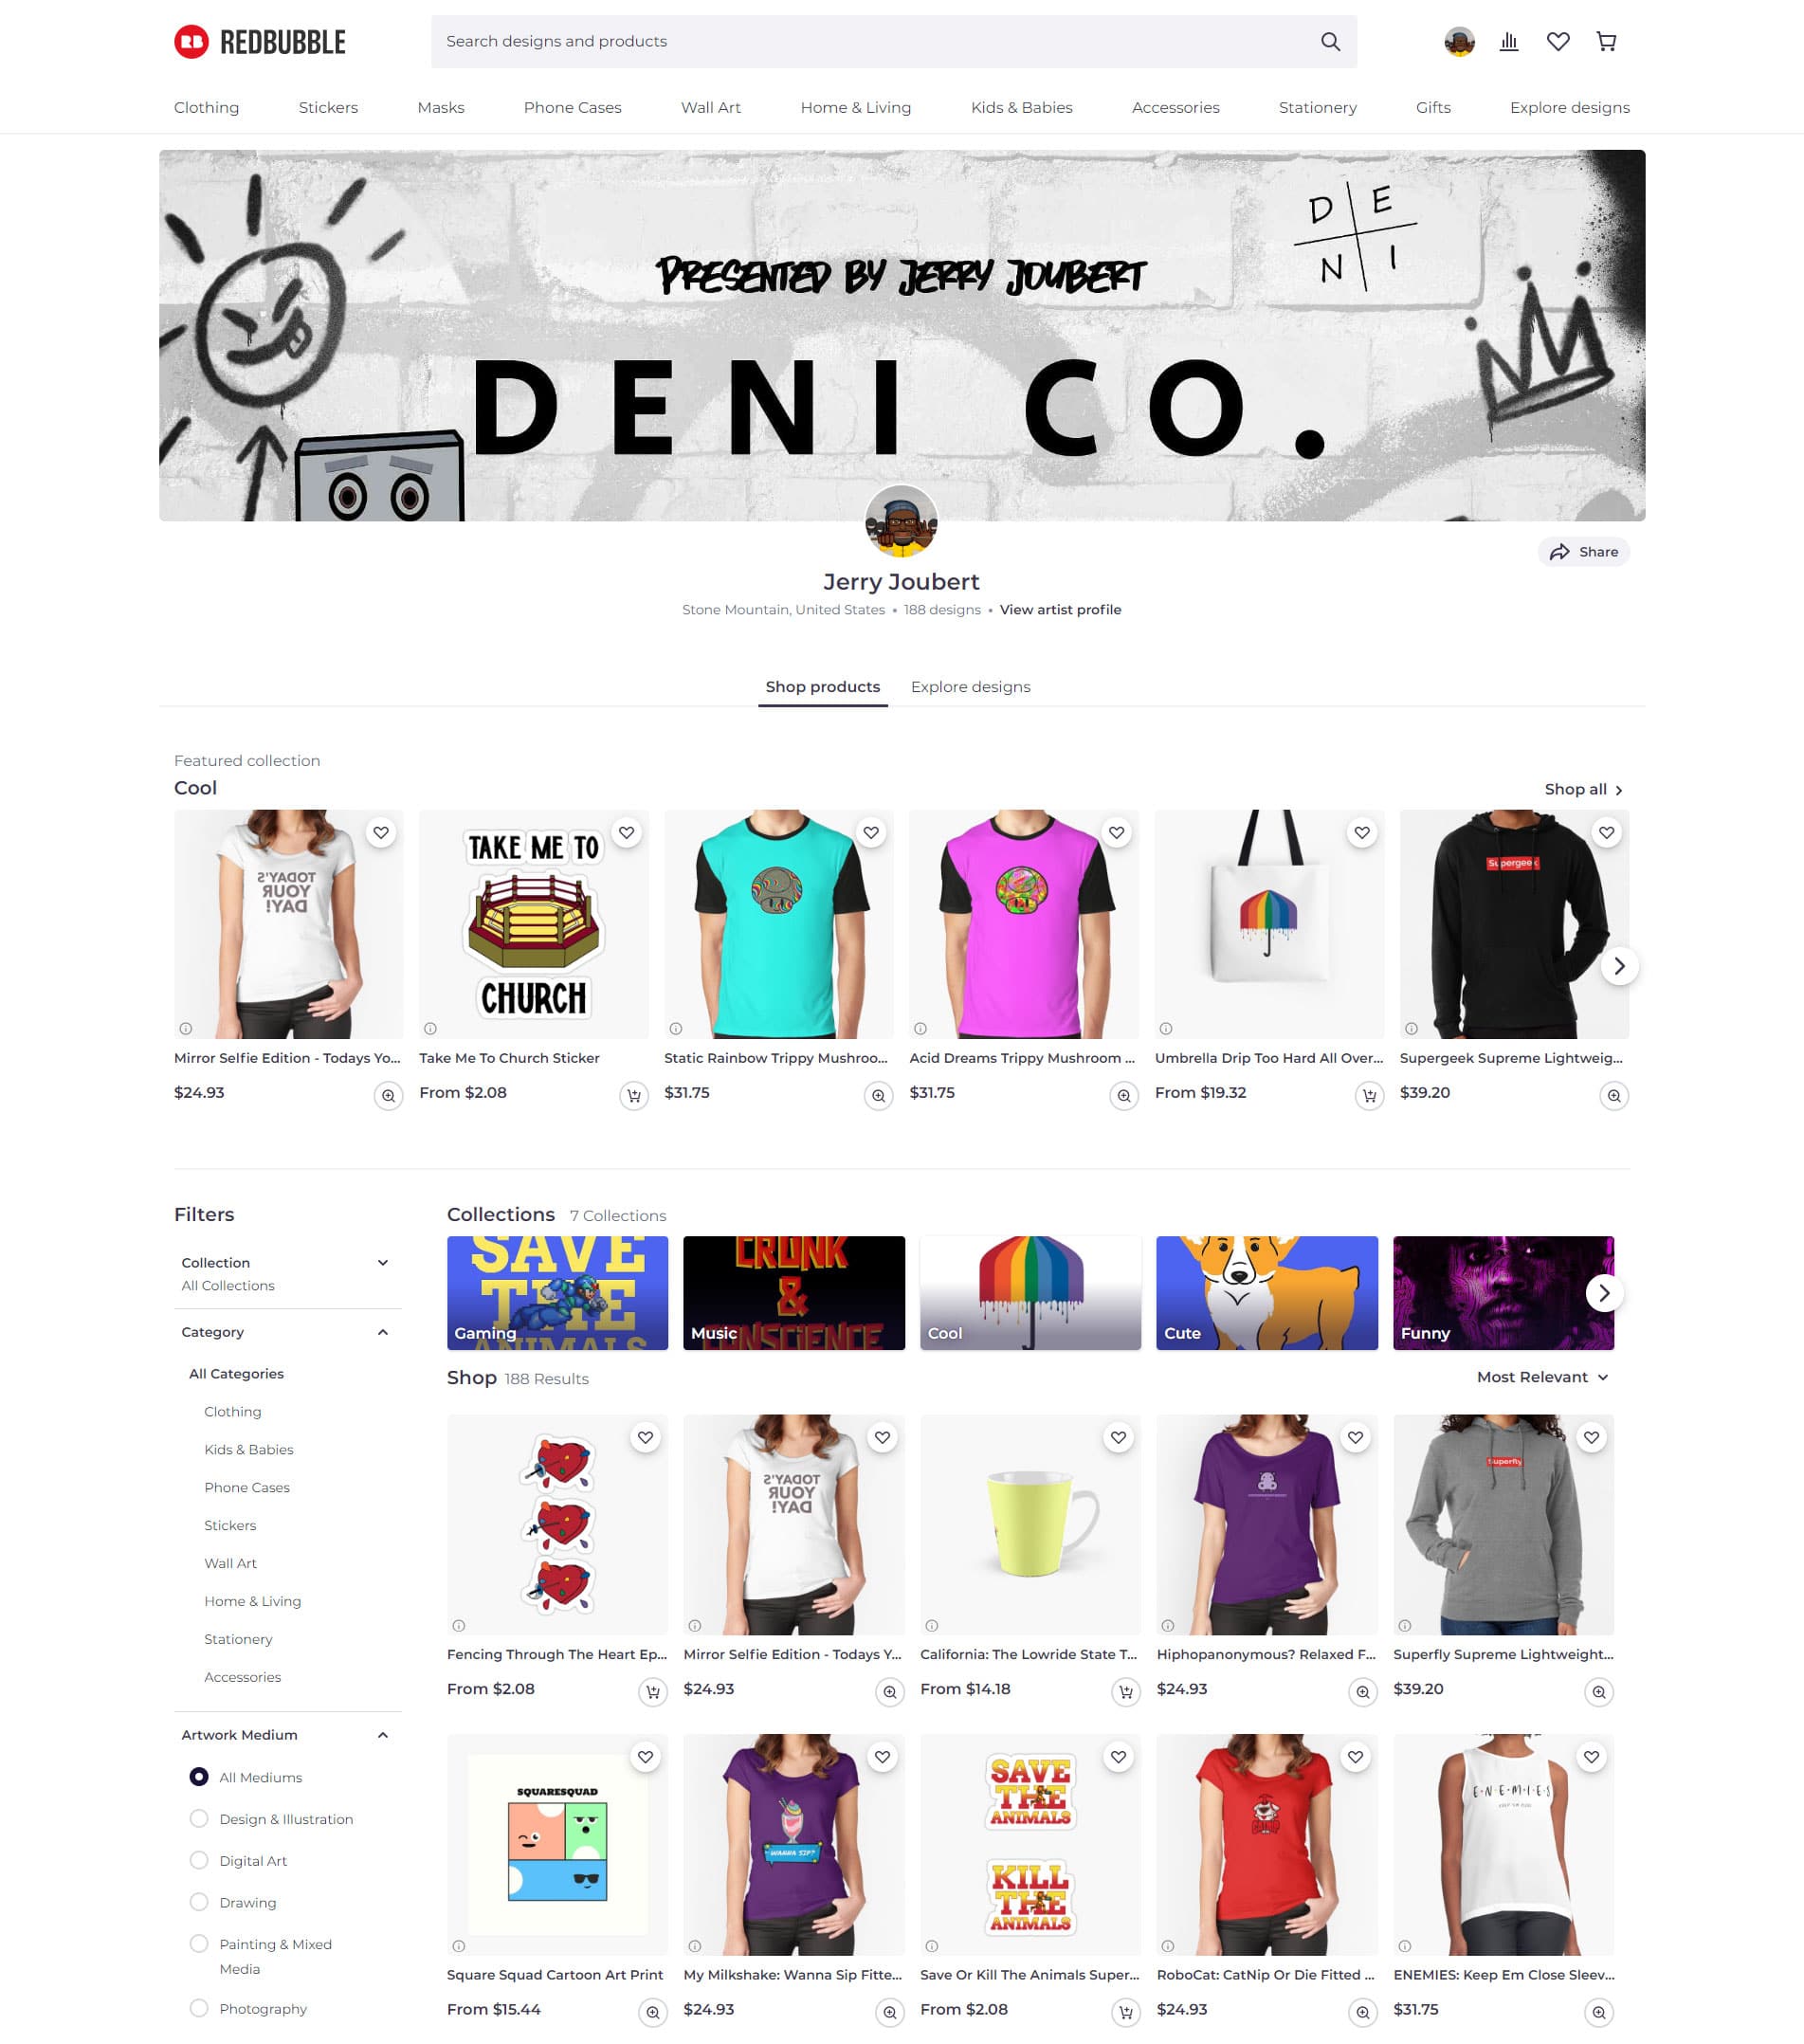 DENI CO. on Redbubble presented by Jerry Joubert